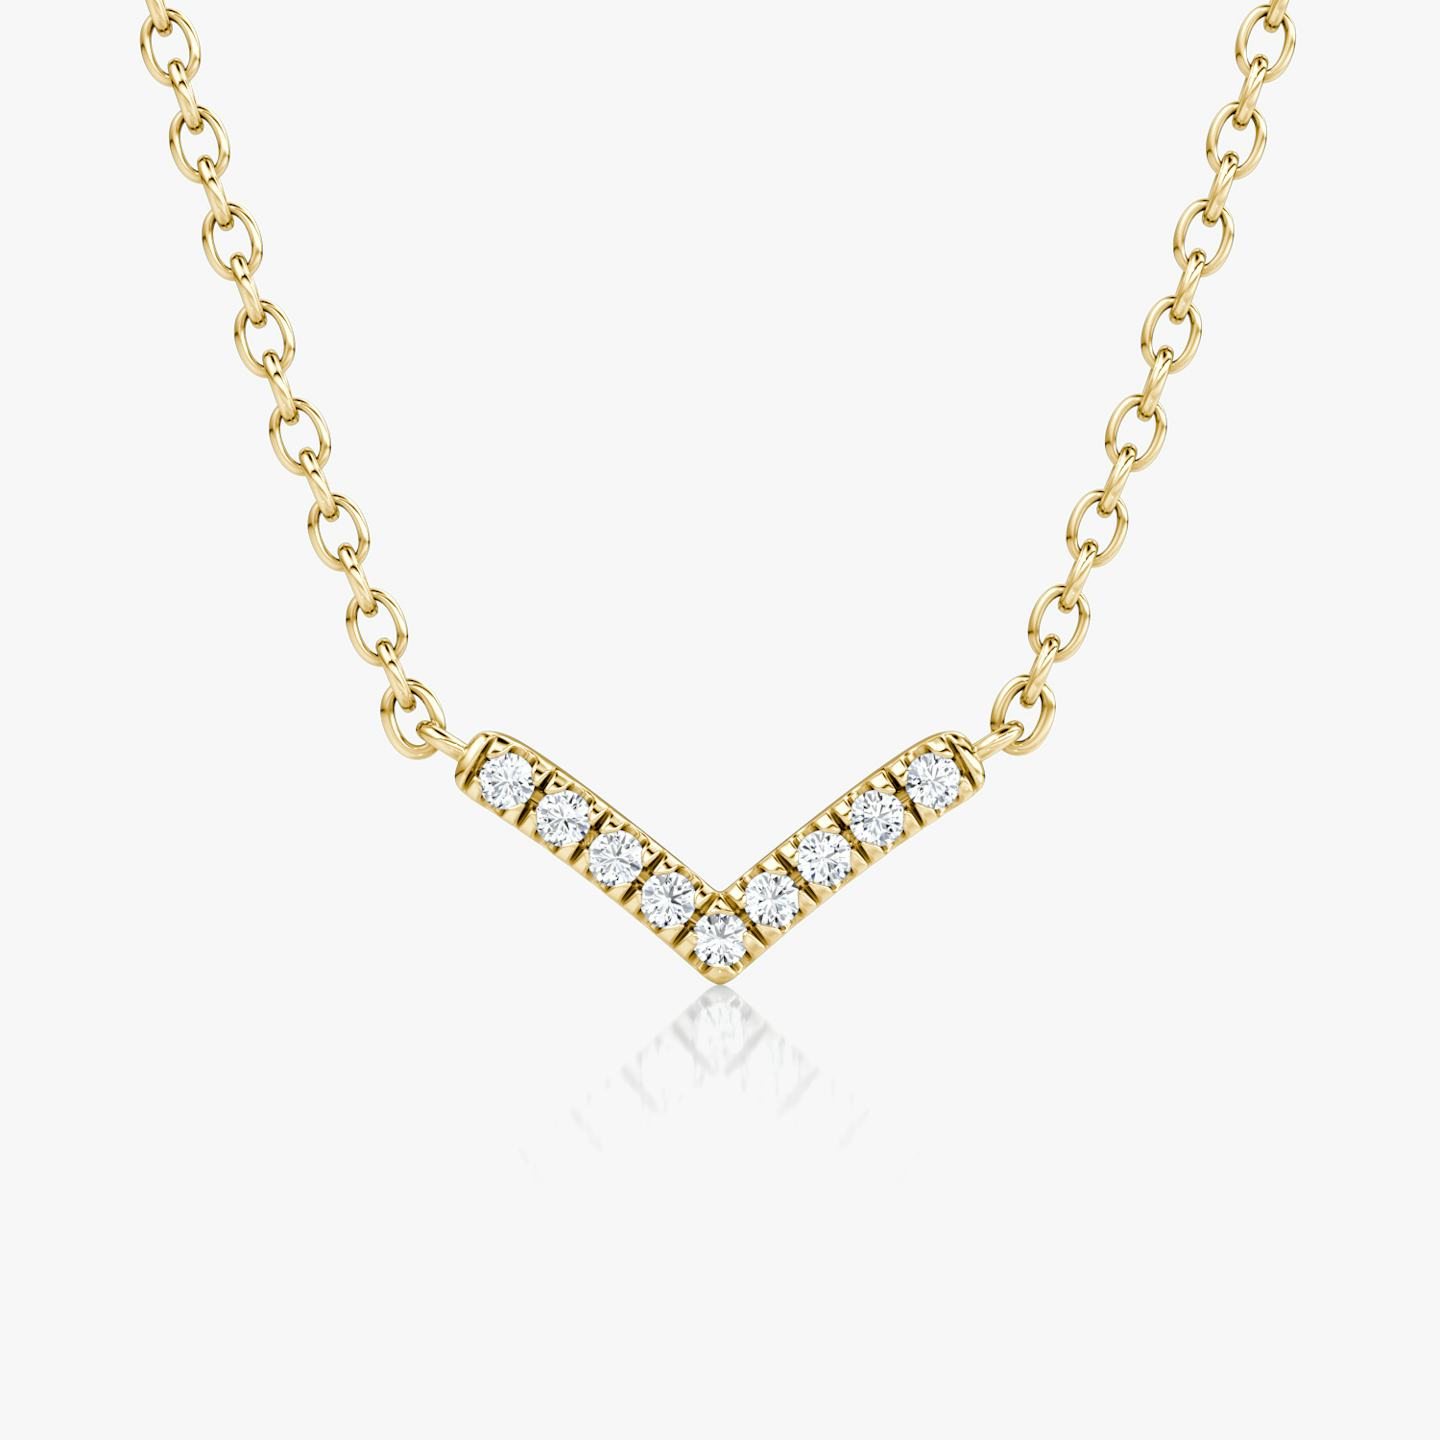 Petite V Necklace | Round Brilliant | 14k | 18k Yellow Gold | Chain length: 16-18